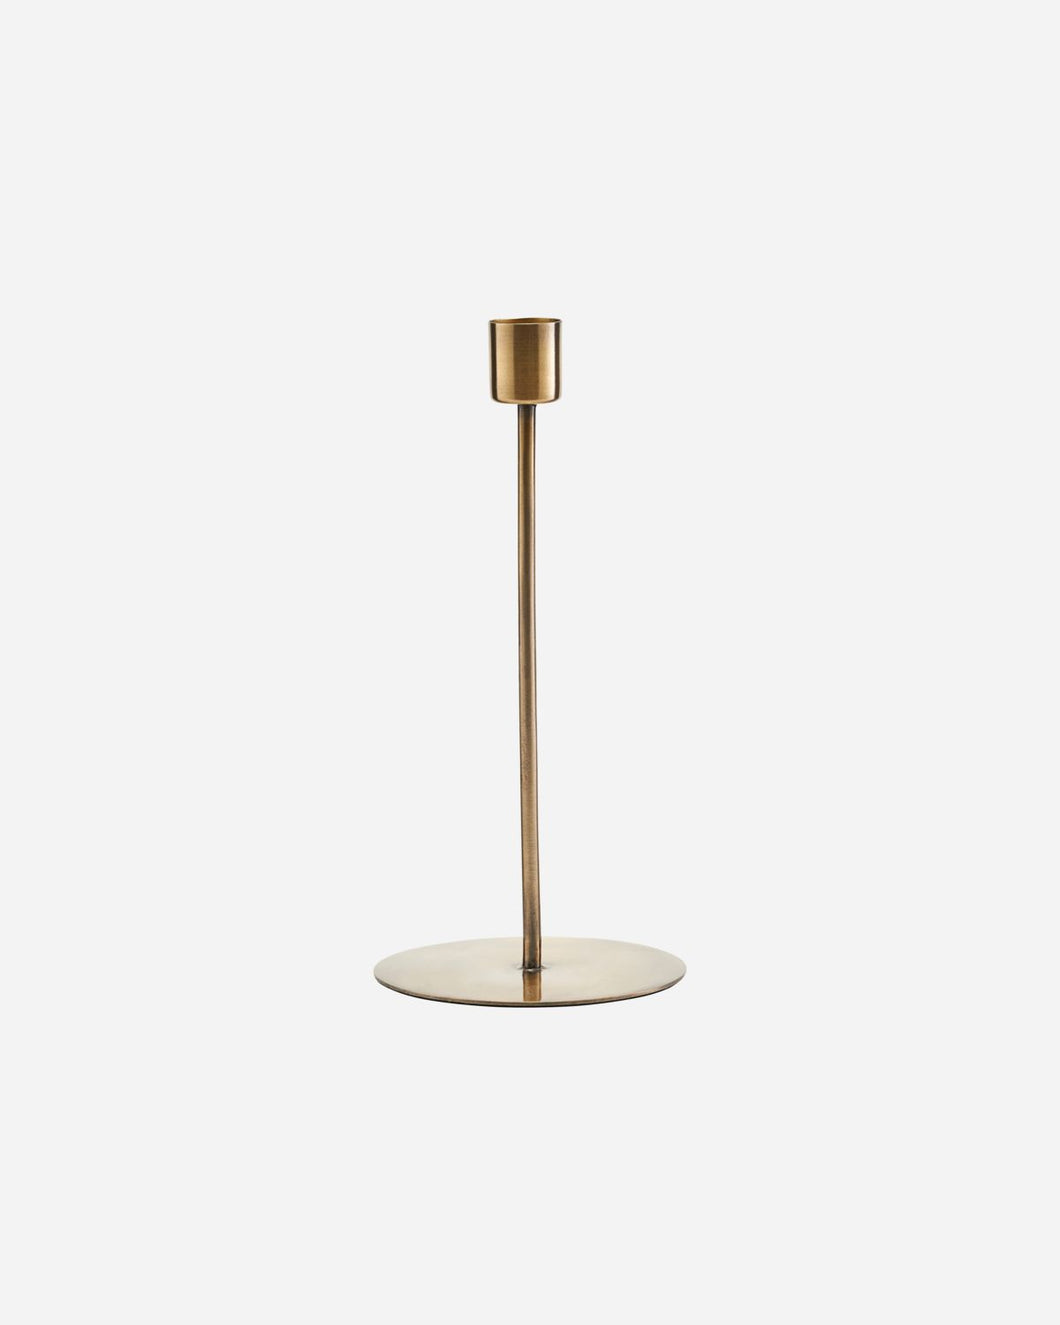 Candle stand in Antique Brass finsh